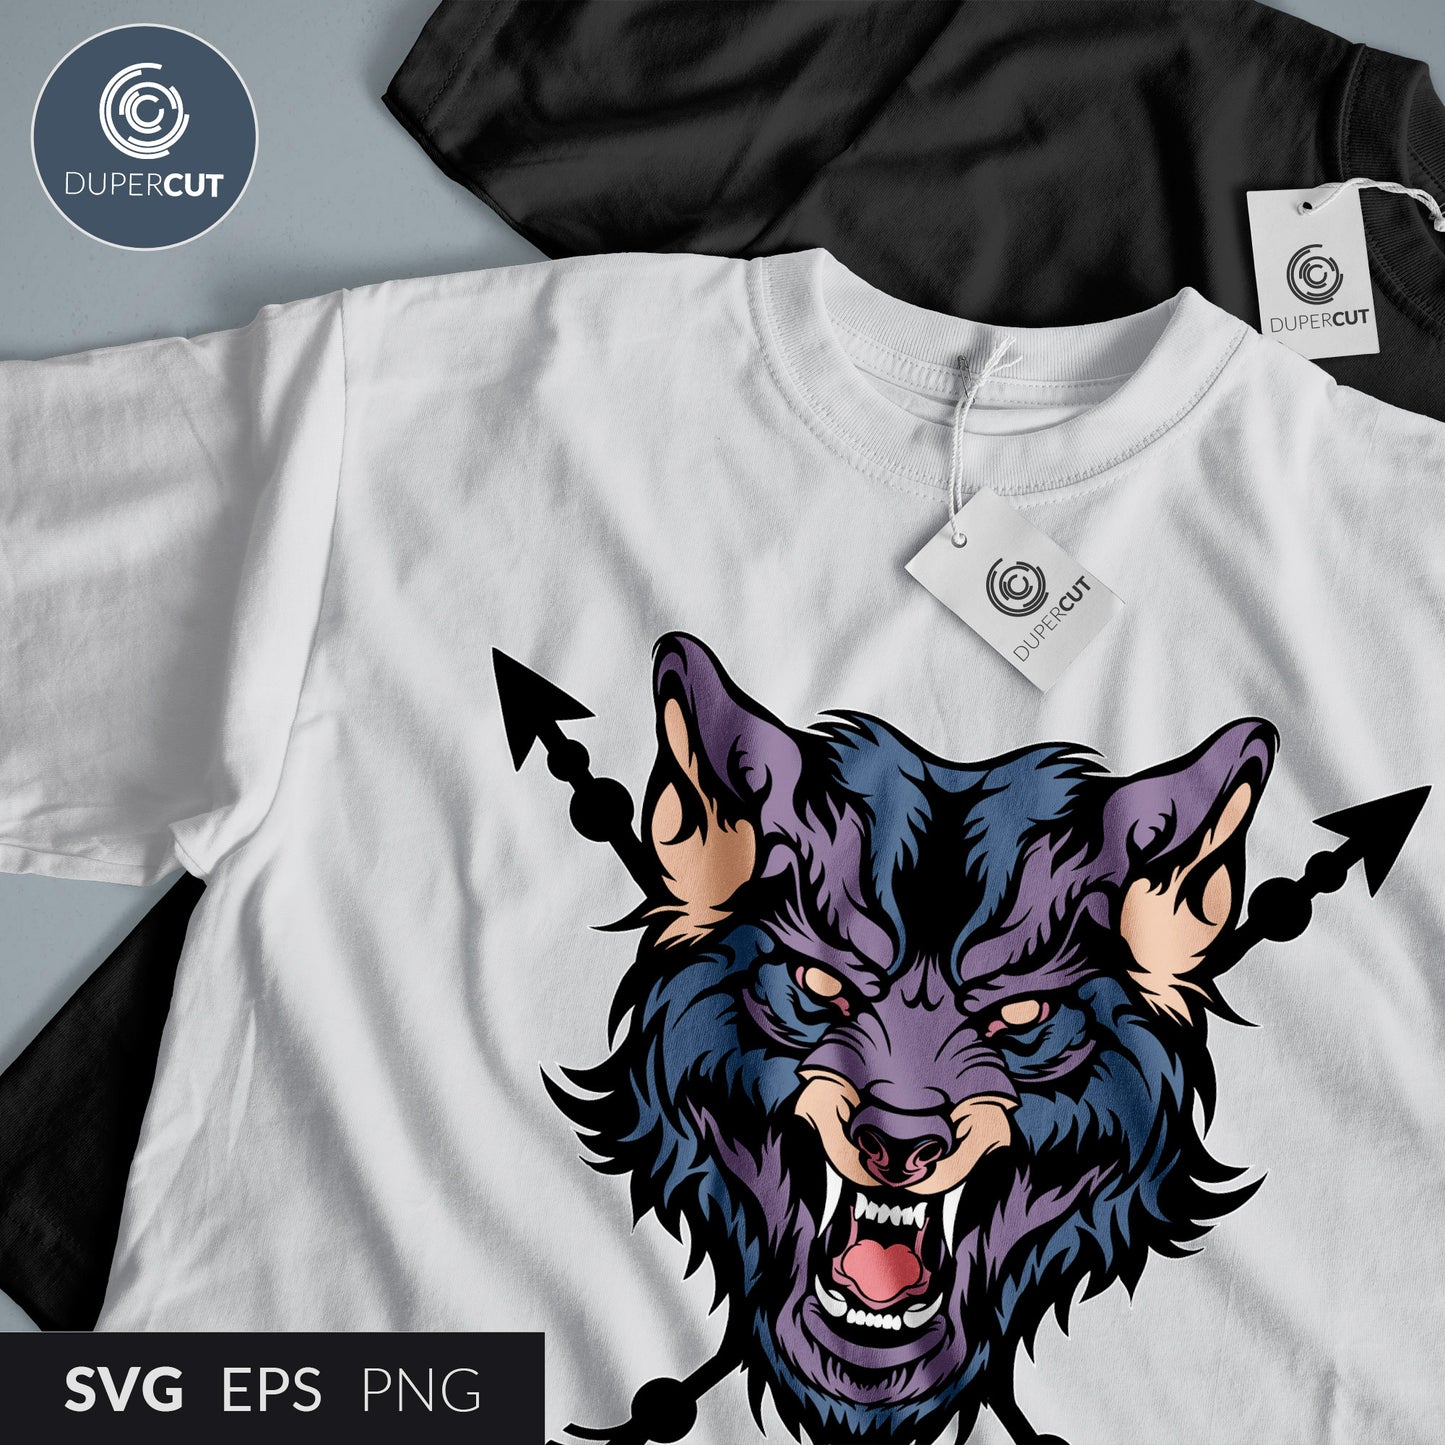 Wolf with arrows - Custom apparel design, Amazon merch template - EPS, SVG, PNG files. Vector Colour illustration for print on demand, sublimation, custom t-shirts, hoodies, tumblers.